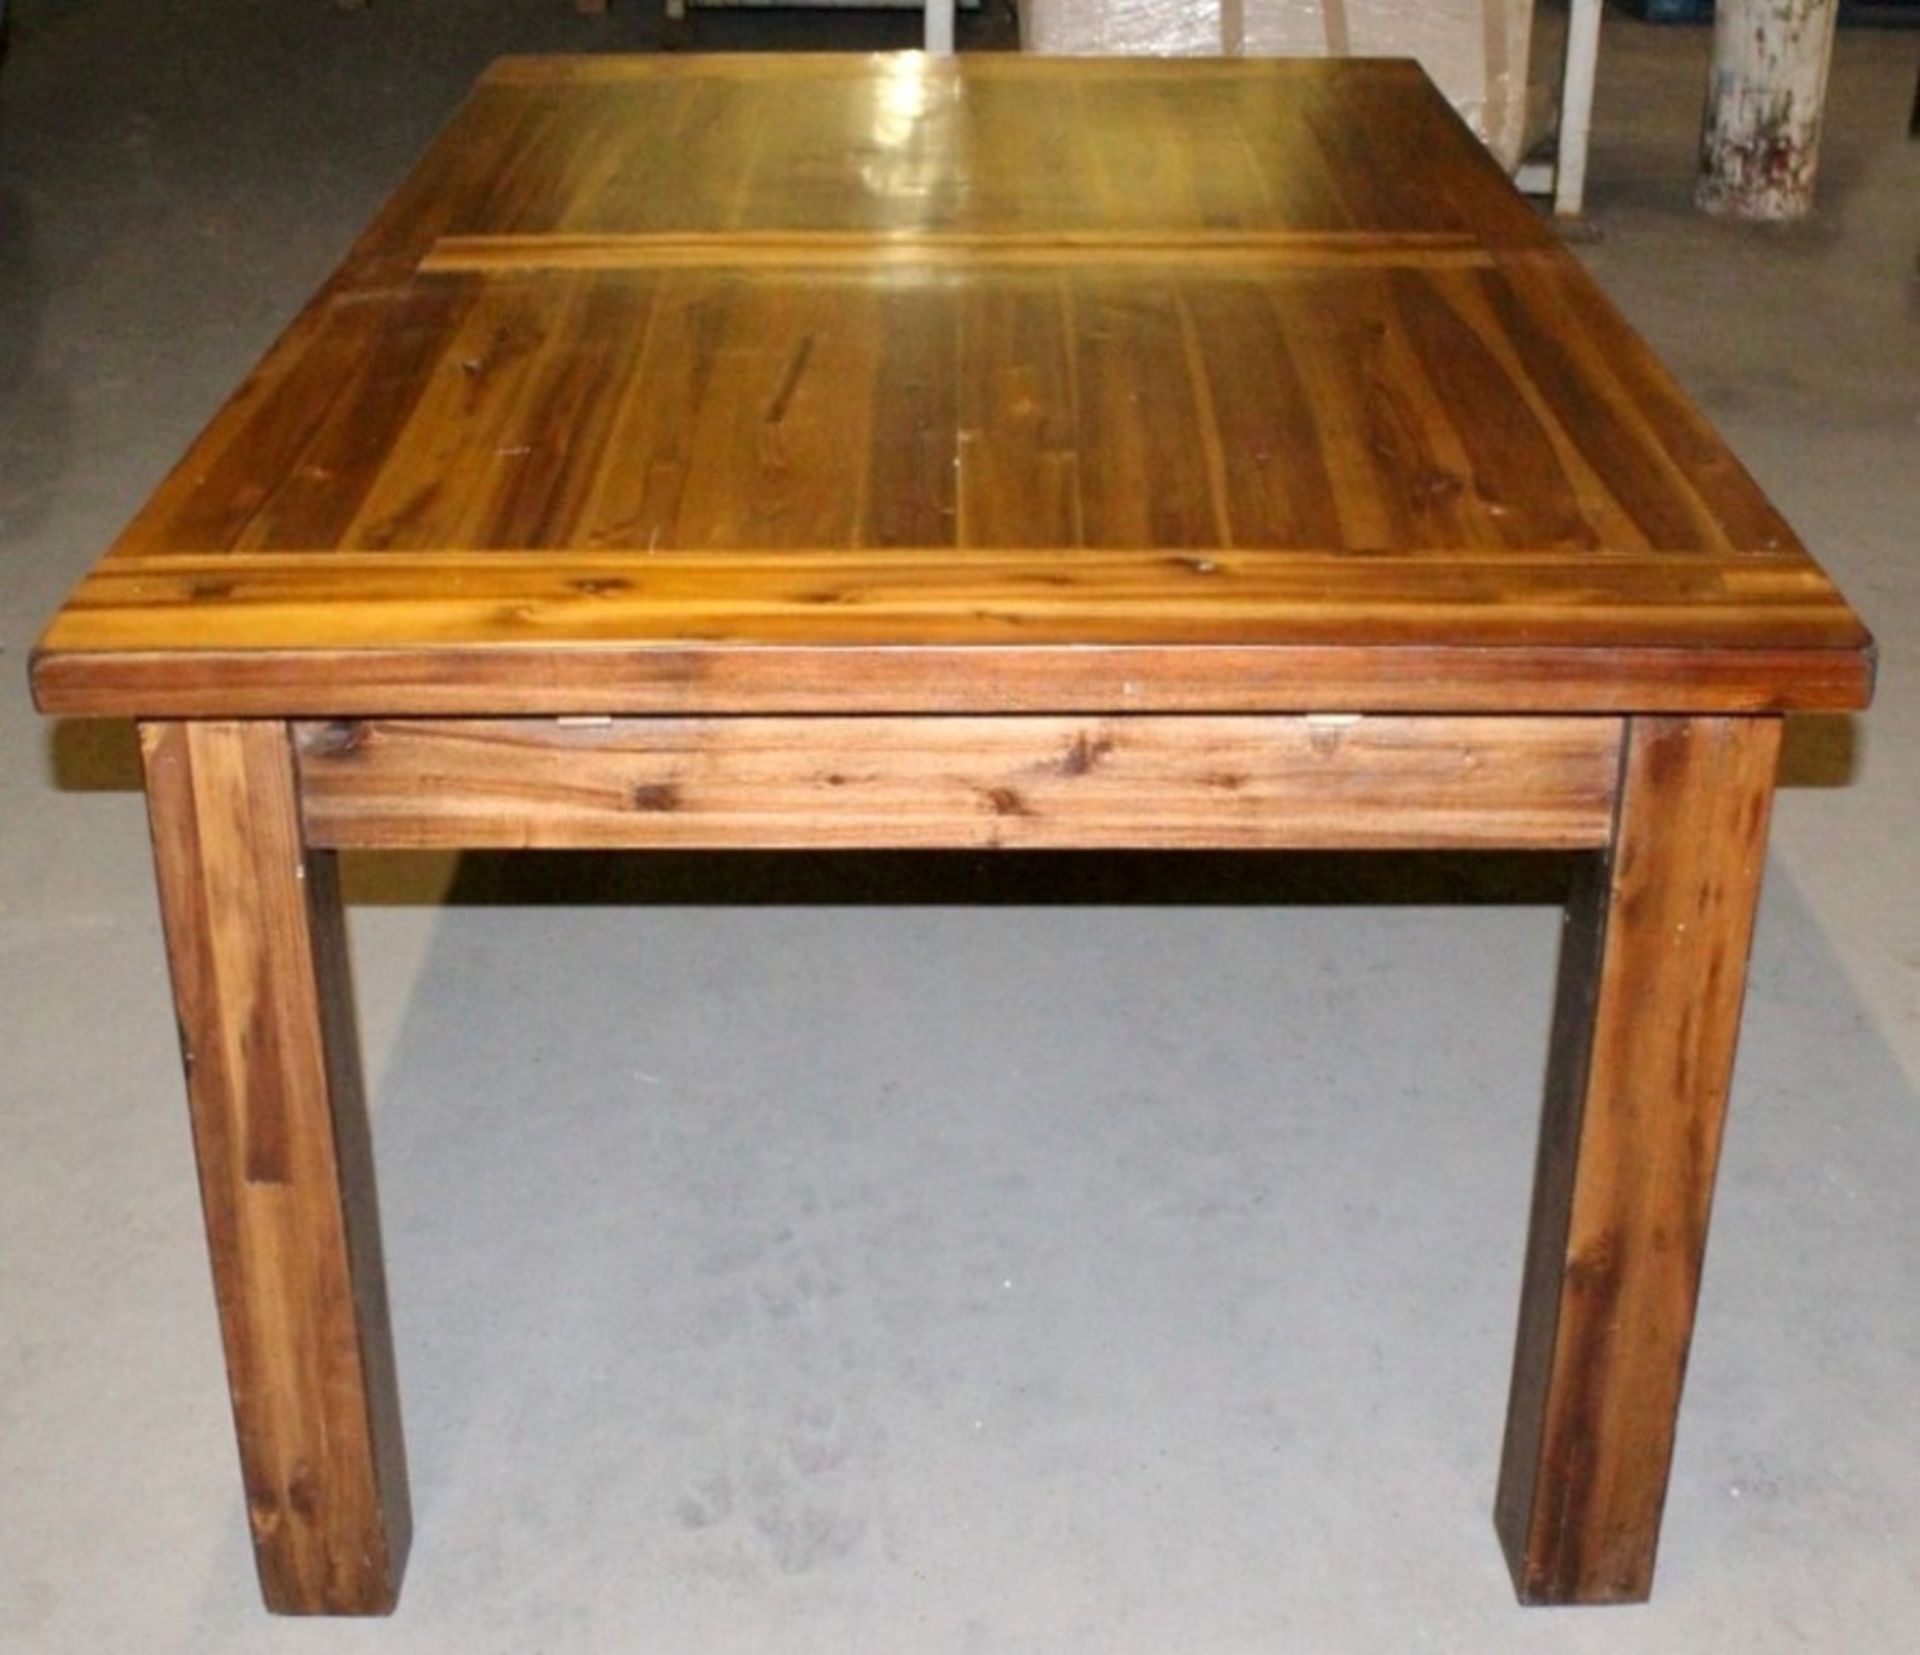 1 x Mark Webster "Cognac" Extending Acacia Solid Wood Table - Dimensions: 194cm x 112cm (Extended - Image 5 of 5